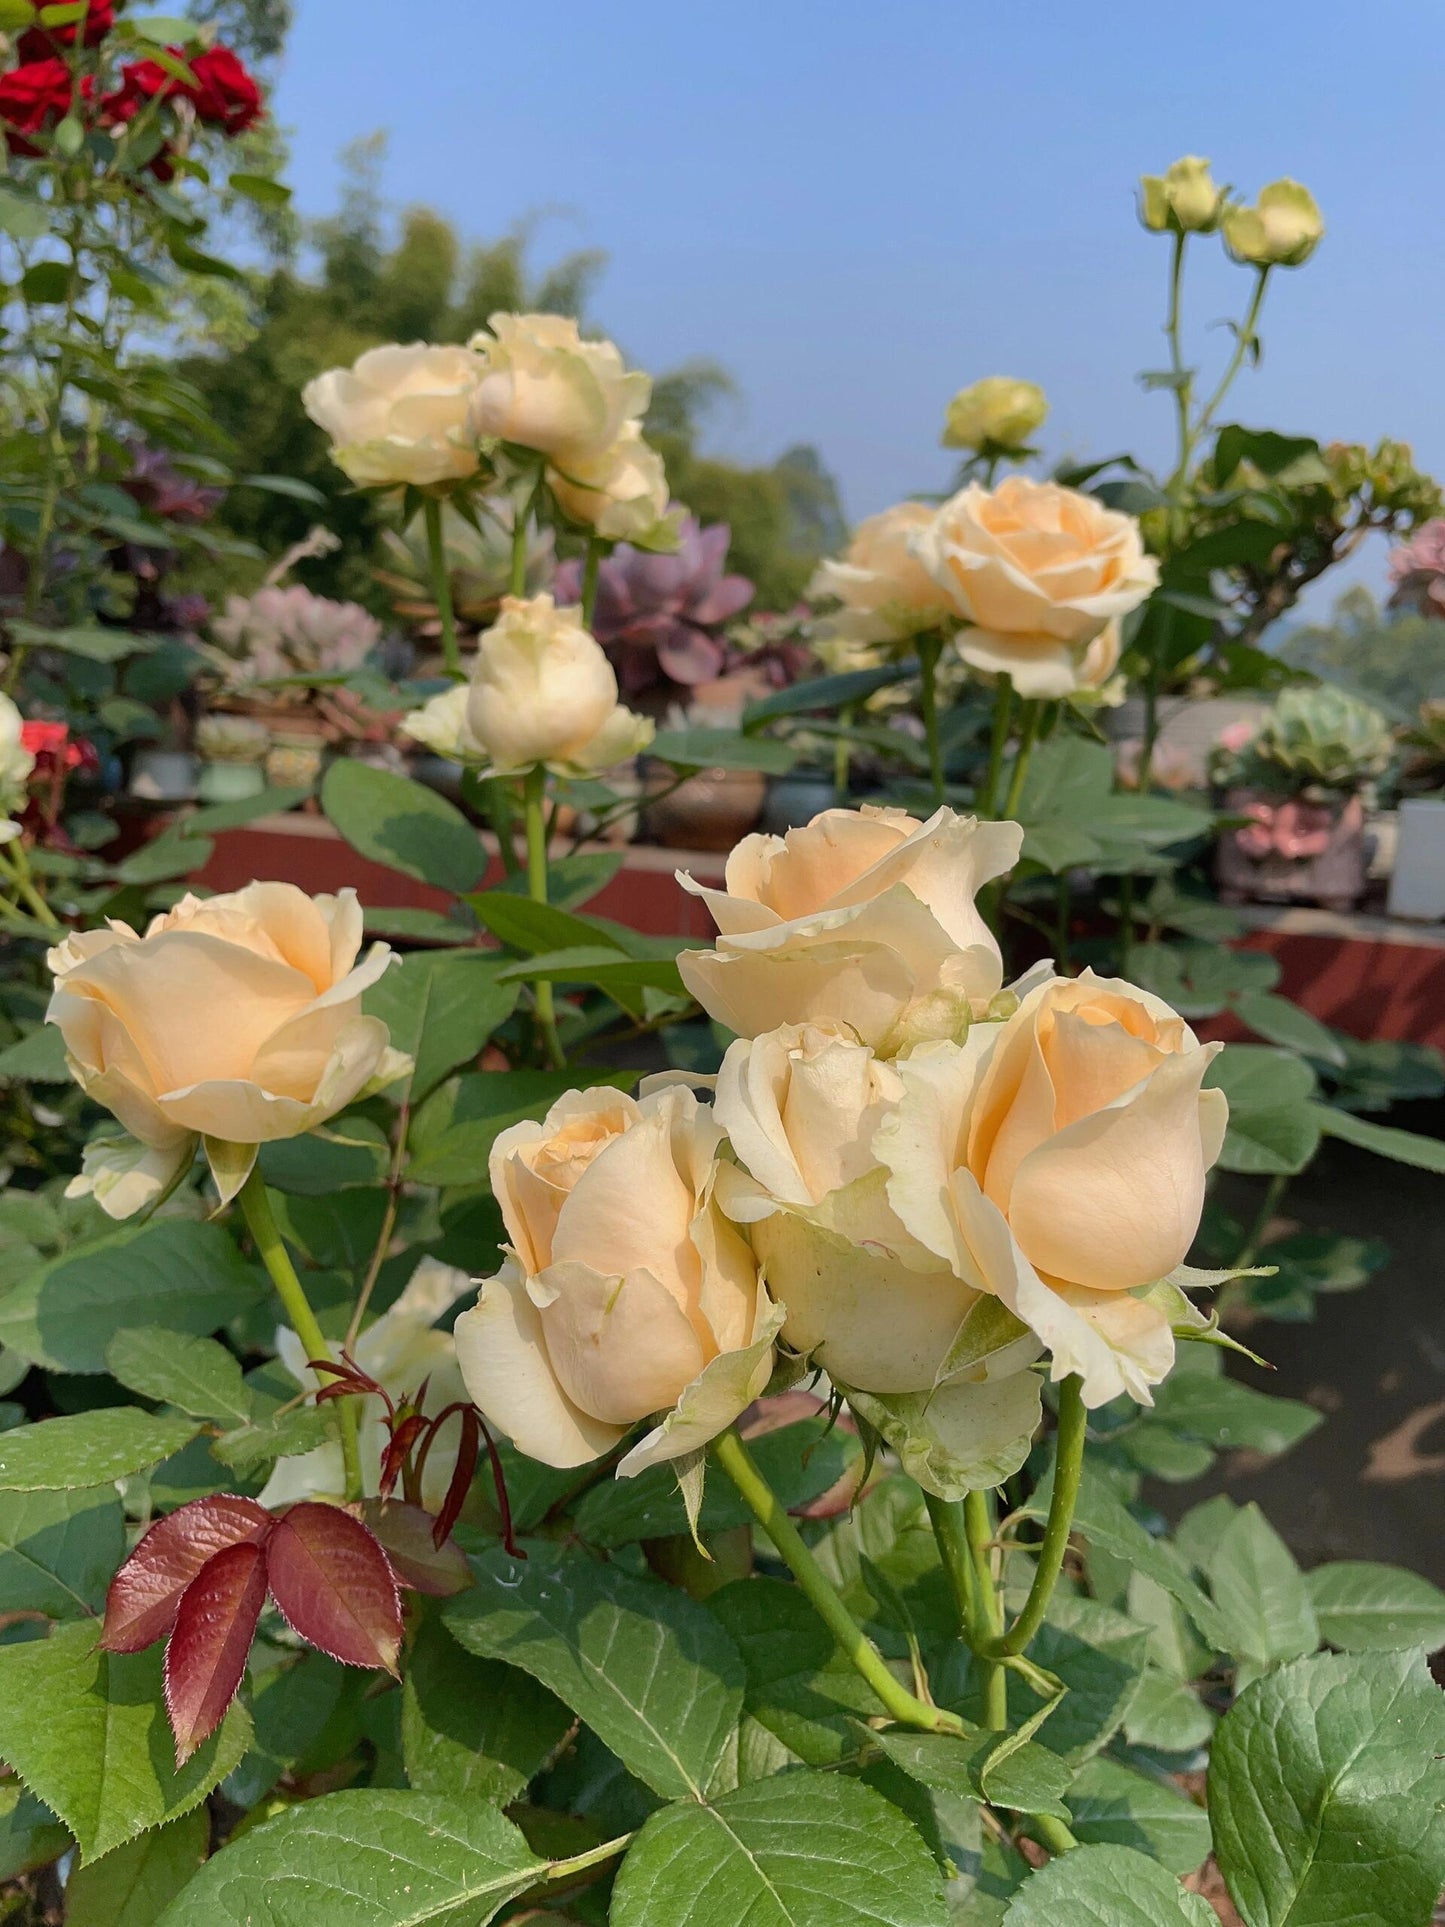 Champagne Rosa【Peach Avalanche】-Own Root| Thornless Cutting Rose| Long flowering period| Popularity| Award| 蜜桃雪山 |Blooms Abundantly|